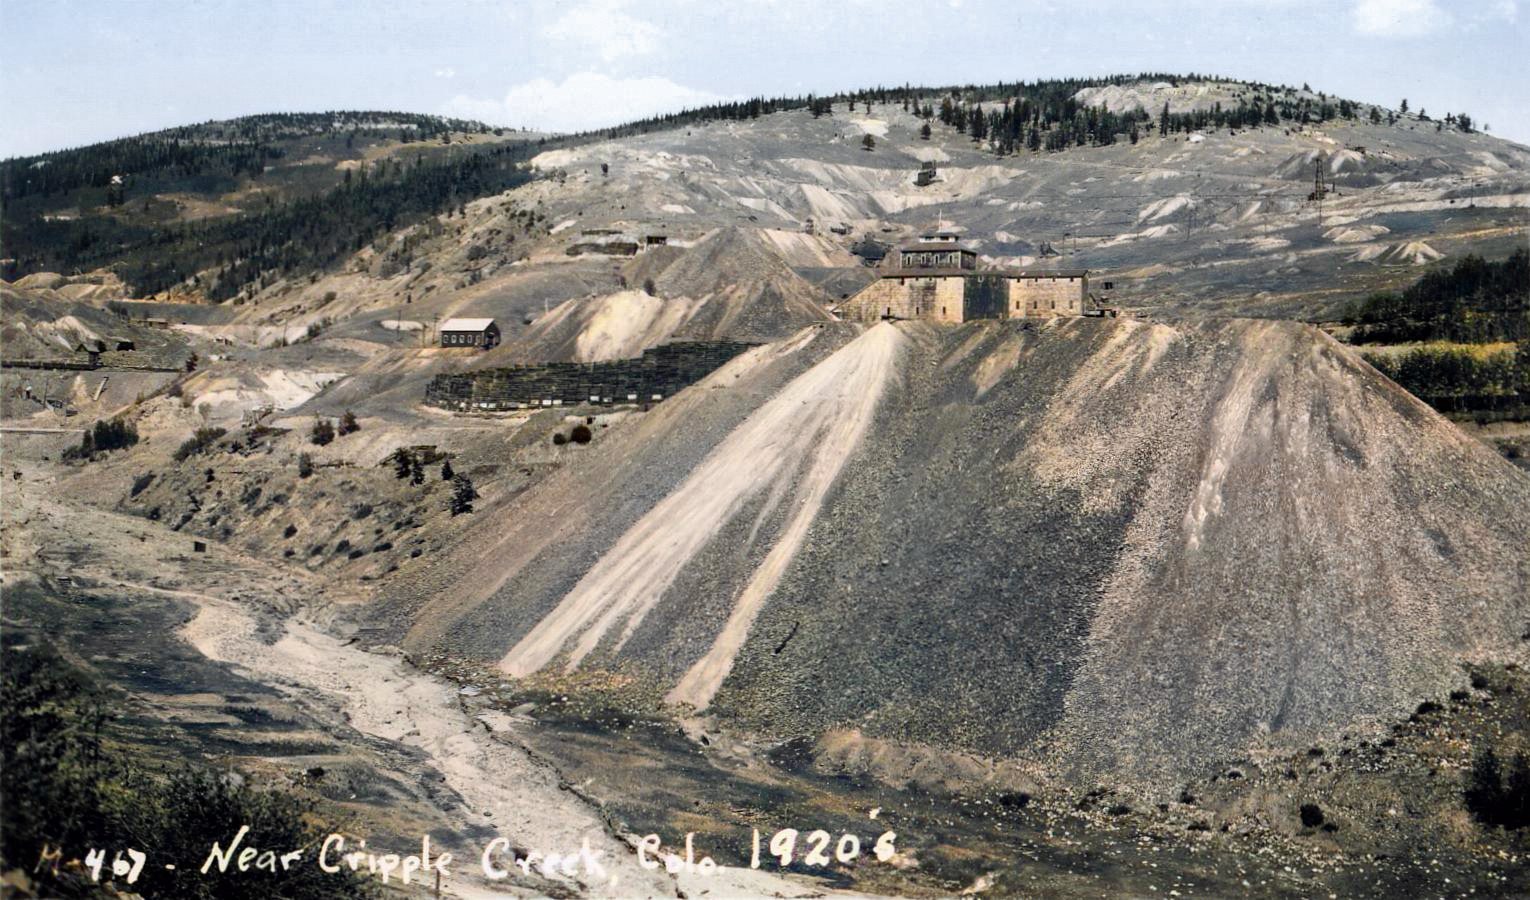 A view in Squaw Gulch towards the huge dump of the Mary McKinney Mine who's structure is popping up behind the dump, against the backdrop of Raven Hill with still a couple of mine ruins standing here and there. Image is marked to be from the 1920's, and in lower left it is still visible some flat parts, like terraces, from structures in the former town of Anaconda.
   I did procure the colored version of this image, if that is what you see, as I think it is nicer. Source is gray-toned, or in common speech black & white. Used an online service and tweaked and worked with image to get what looks best to my eyes for the moment.